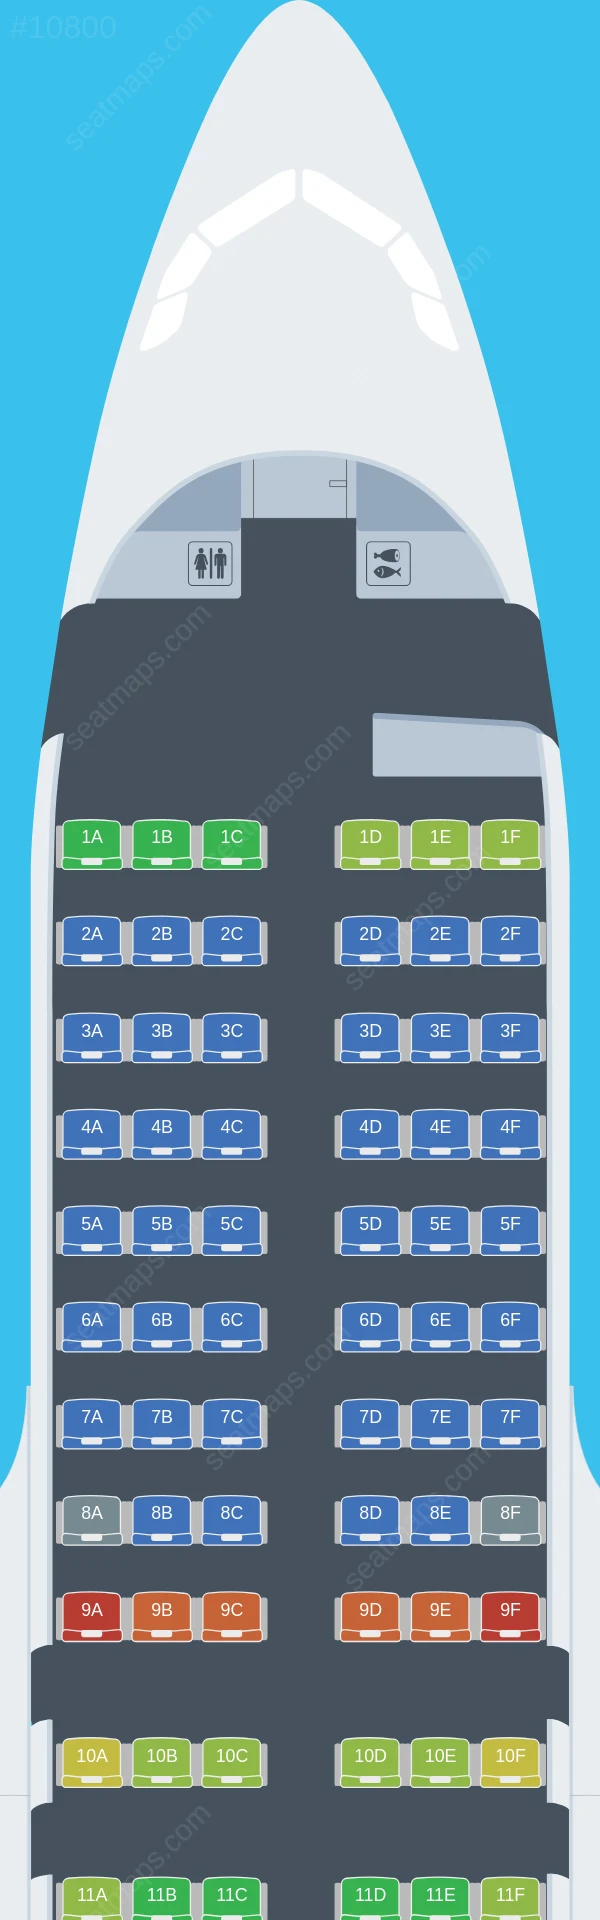 airBaltic Airbus A319-100 seatmap preview